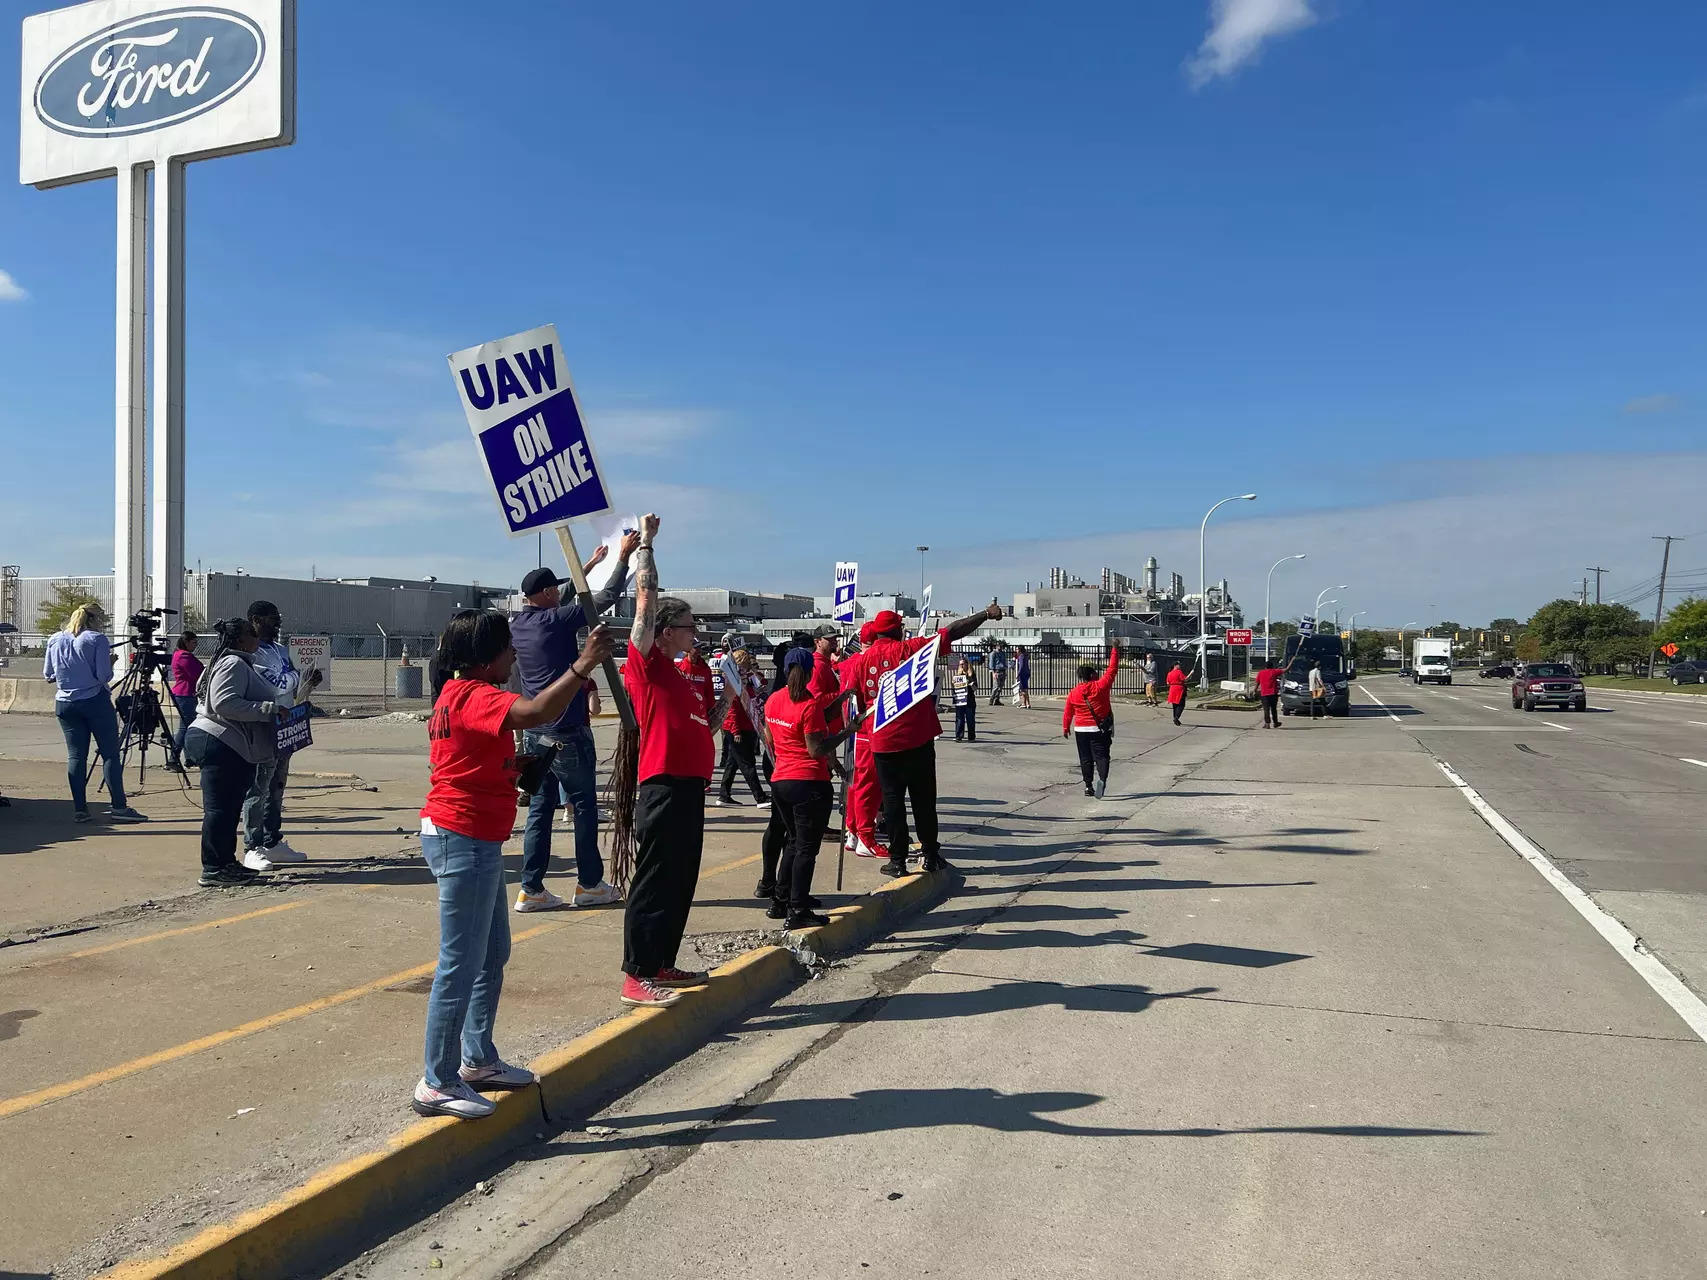 <p>Ford announced the delay Monday and is in the midst of national contract talks with the United Auto Workers union, which wants to represent workers at battery factories and win them top wages.</p>